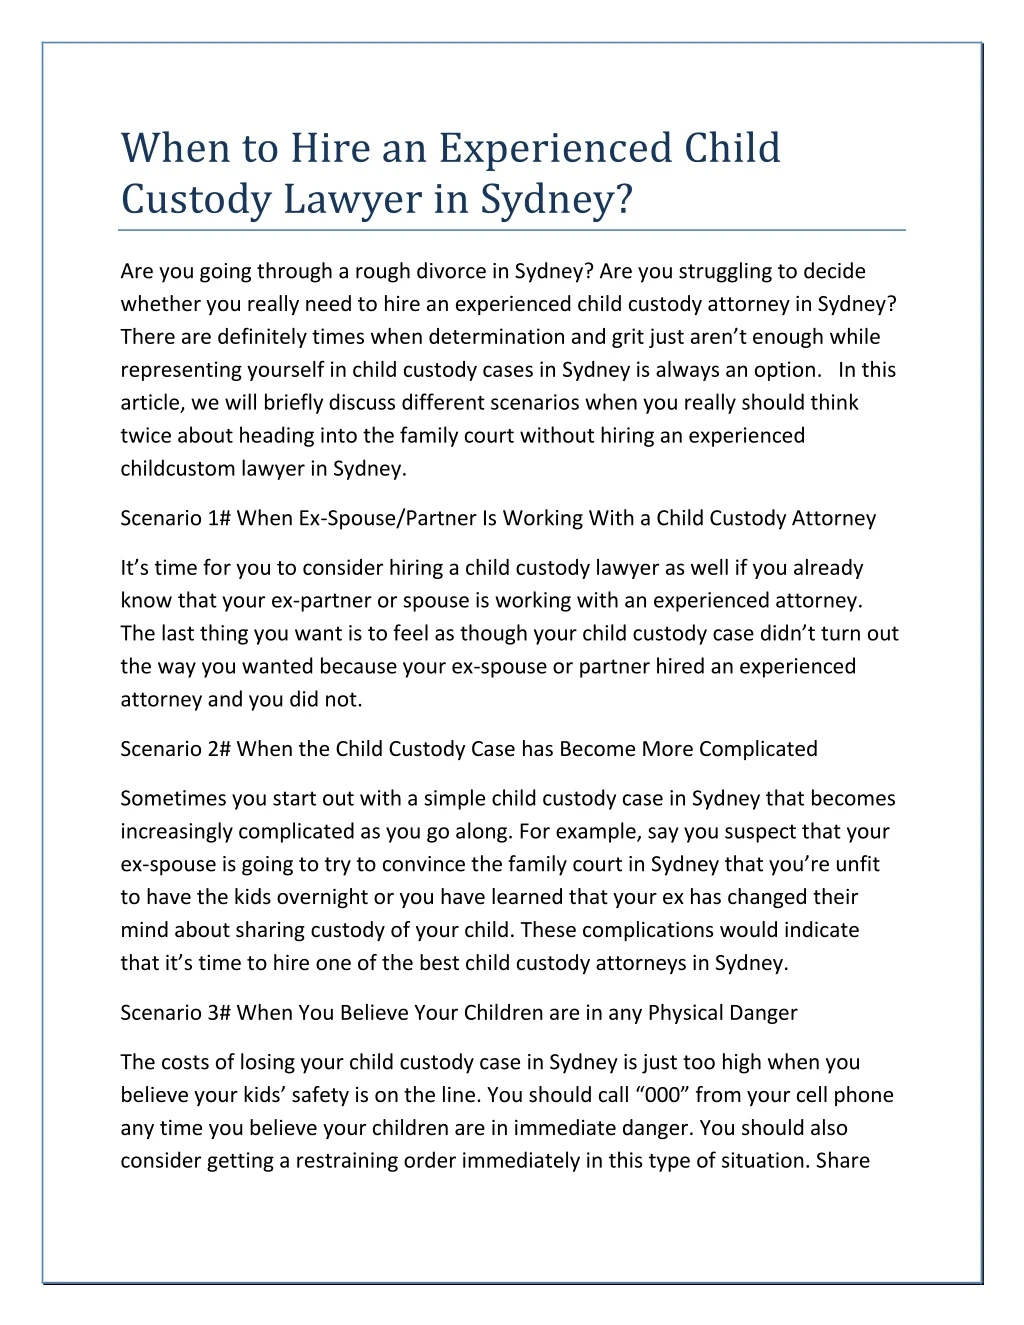 when to hire an experienced child custody lawyer